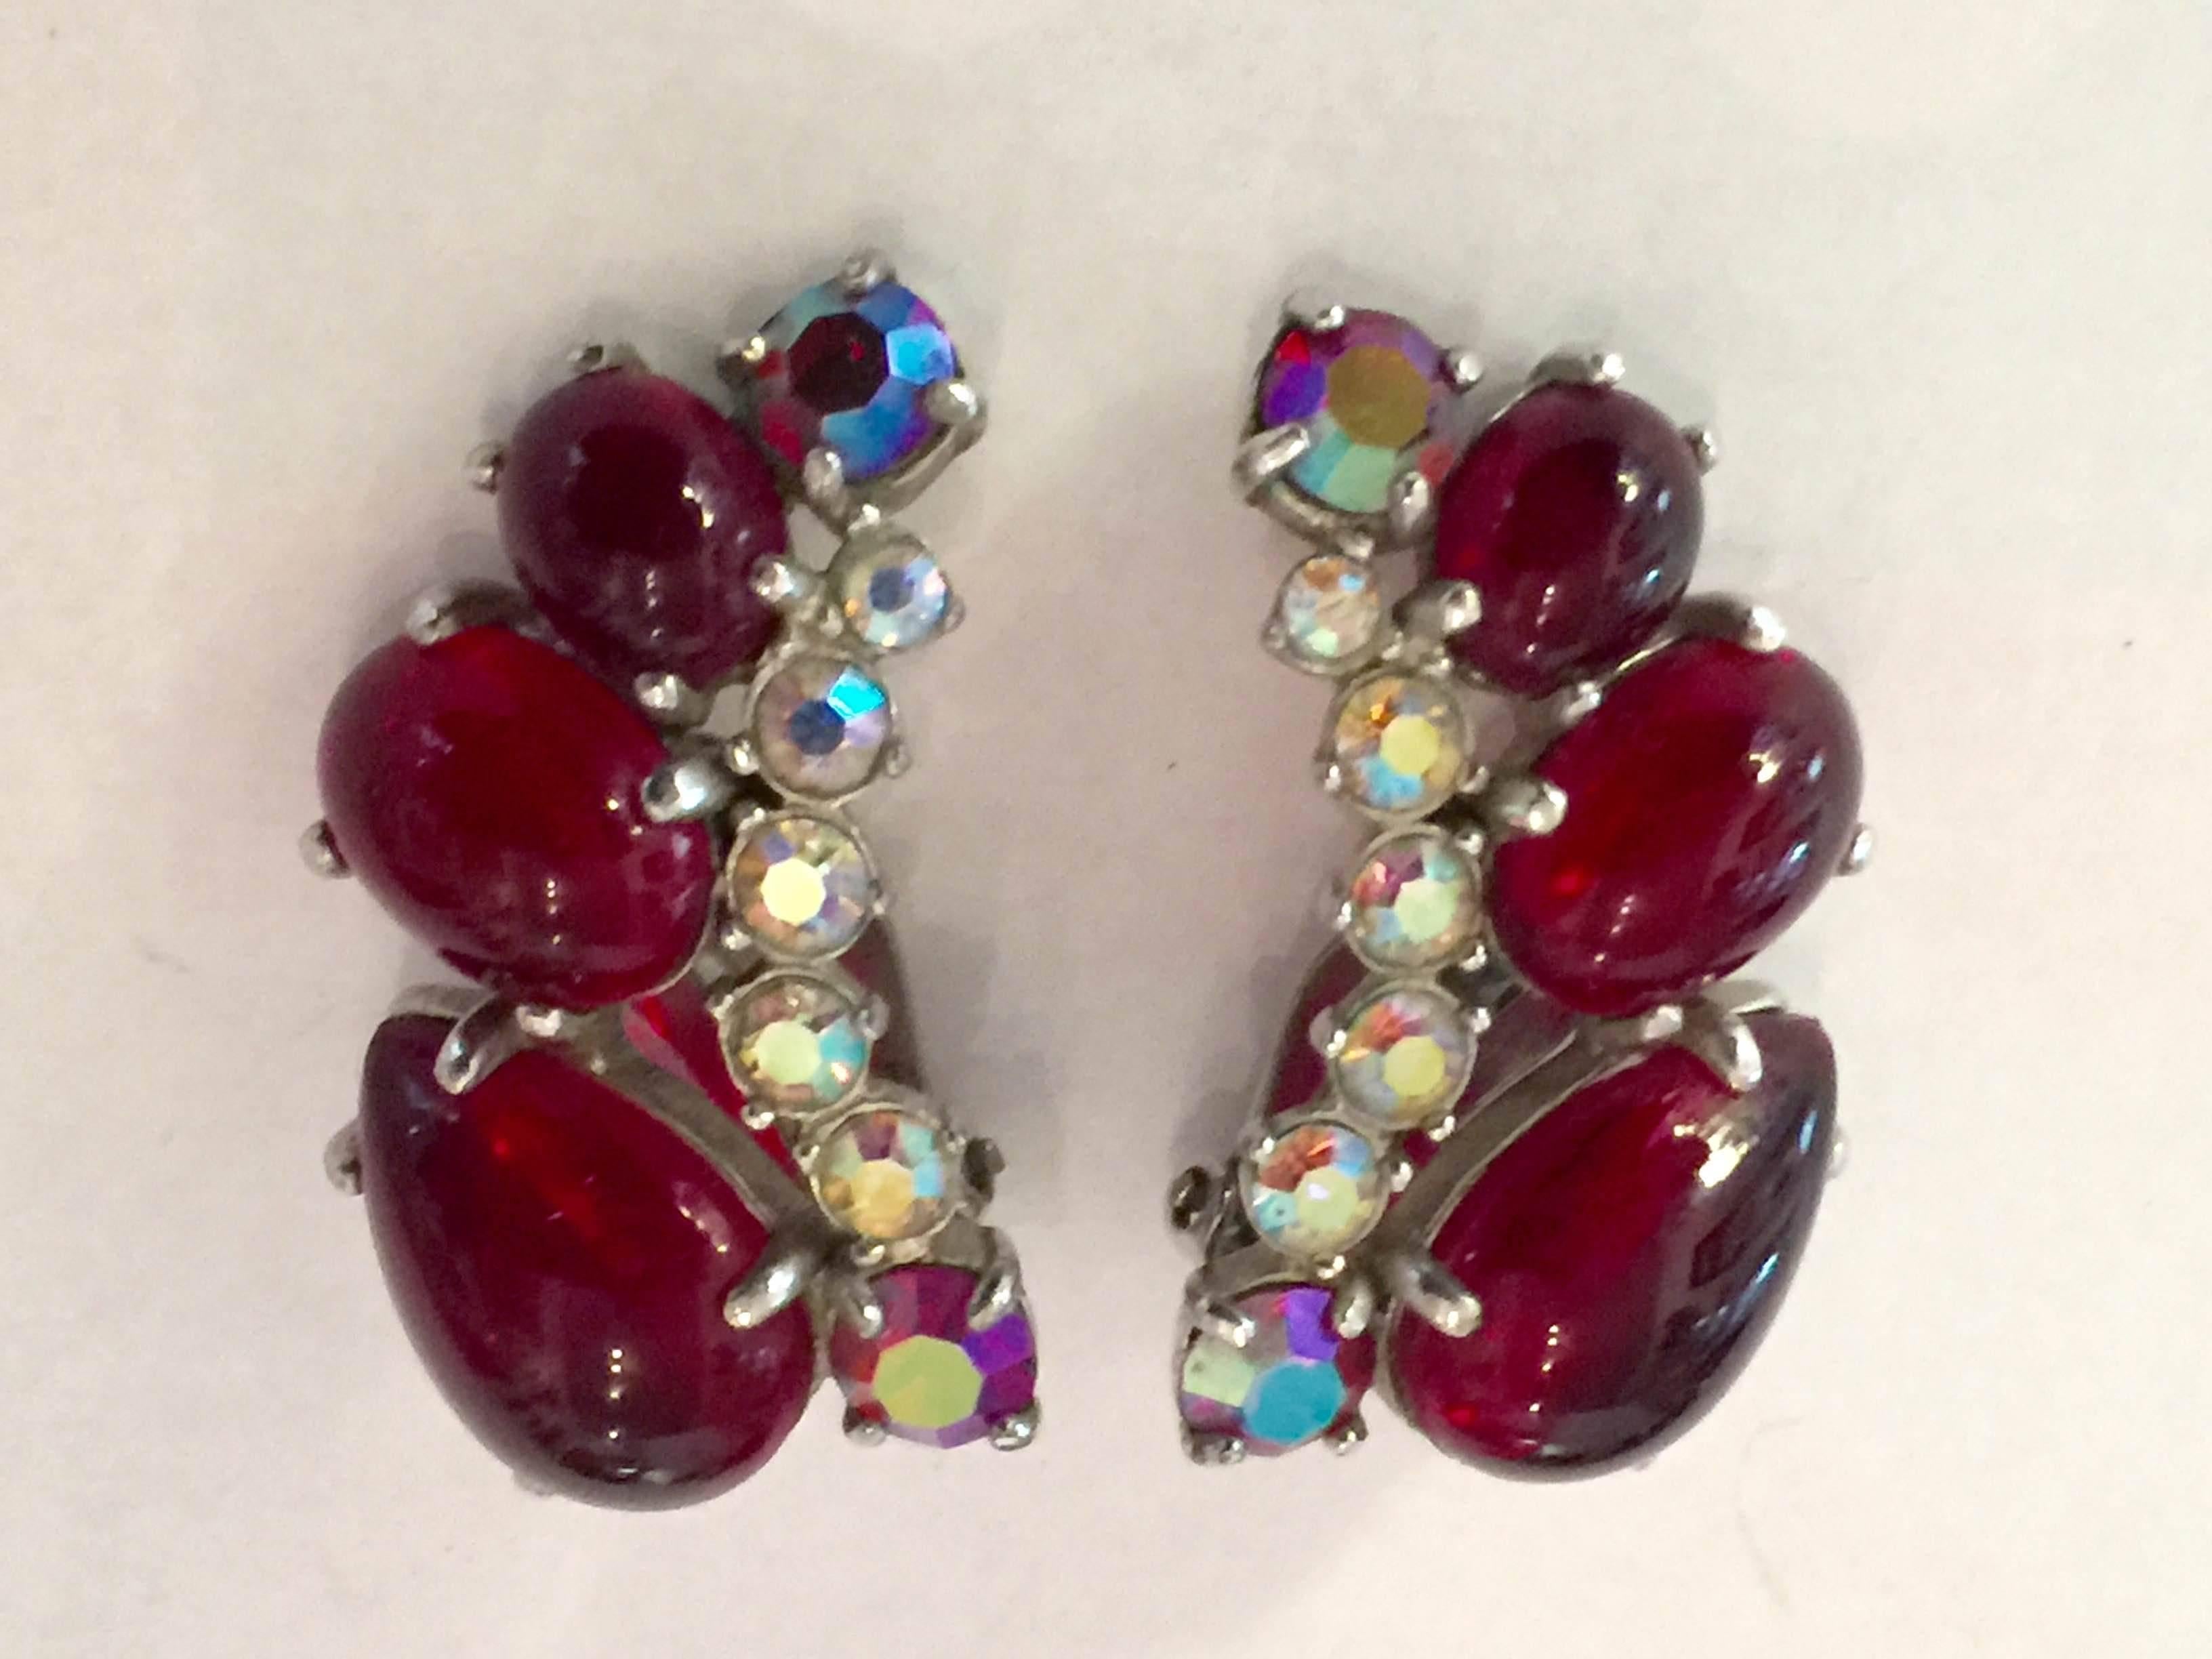 An opulent pair of earrings by Schiaparelli, exhibit the classic 50's crescent shape, so popular in the period. Graduated size brilliant red cabochons trace the line of the ear, and are edged with luscious aurora borealis stonework. Original clip on